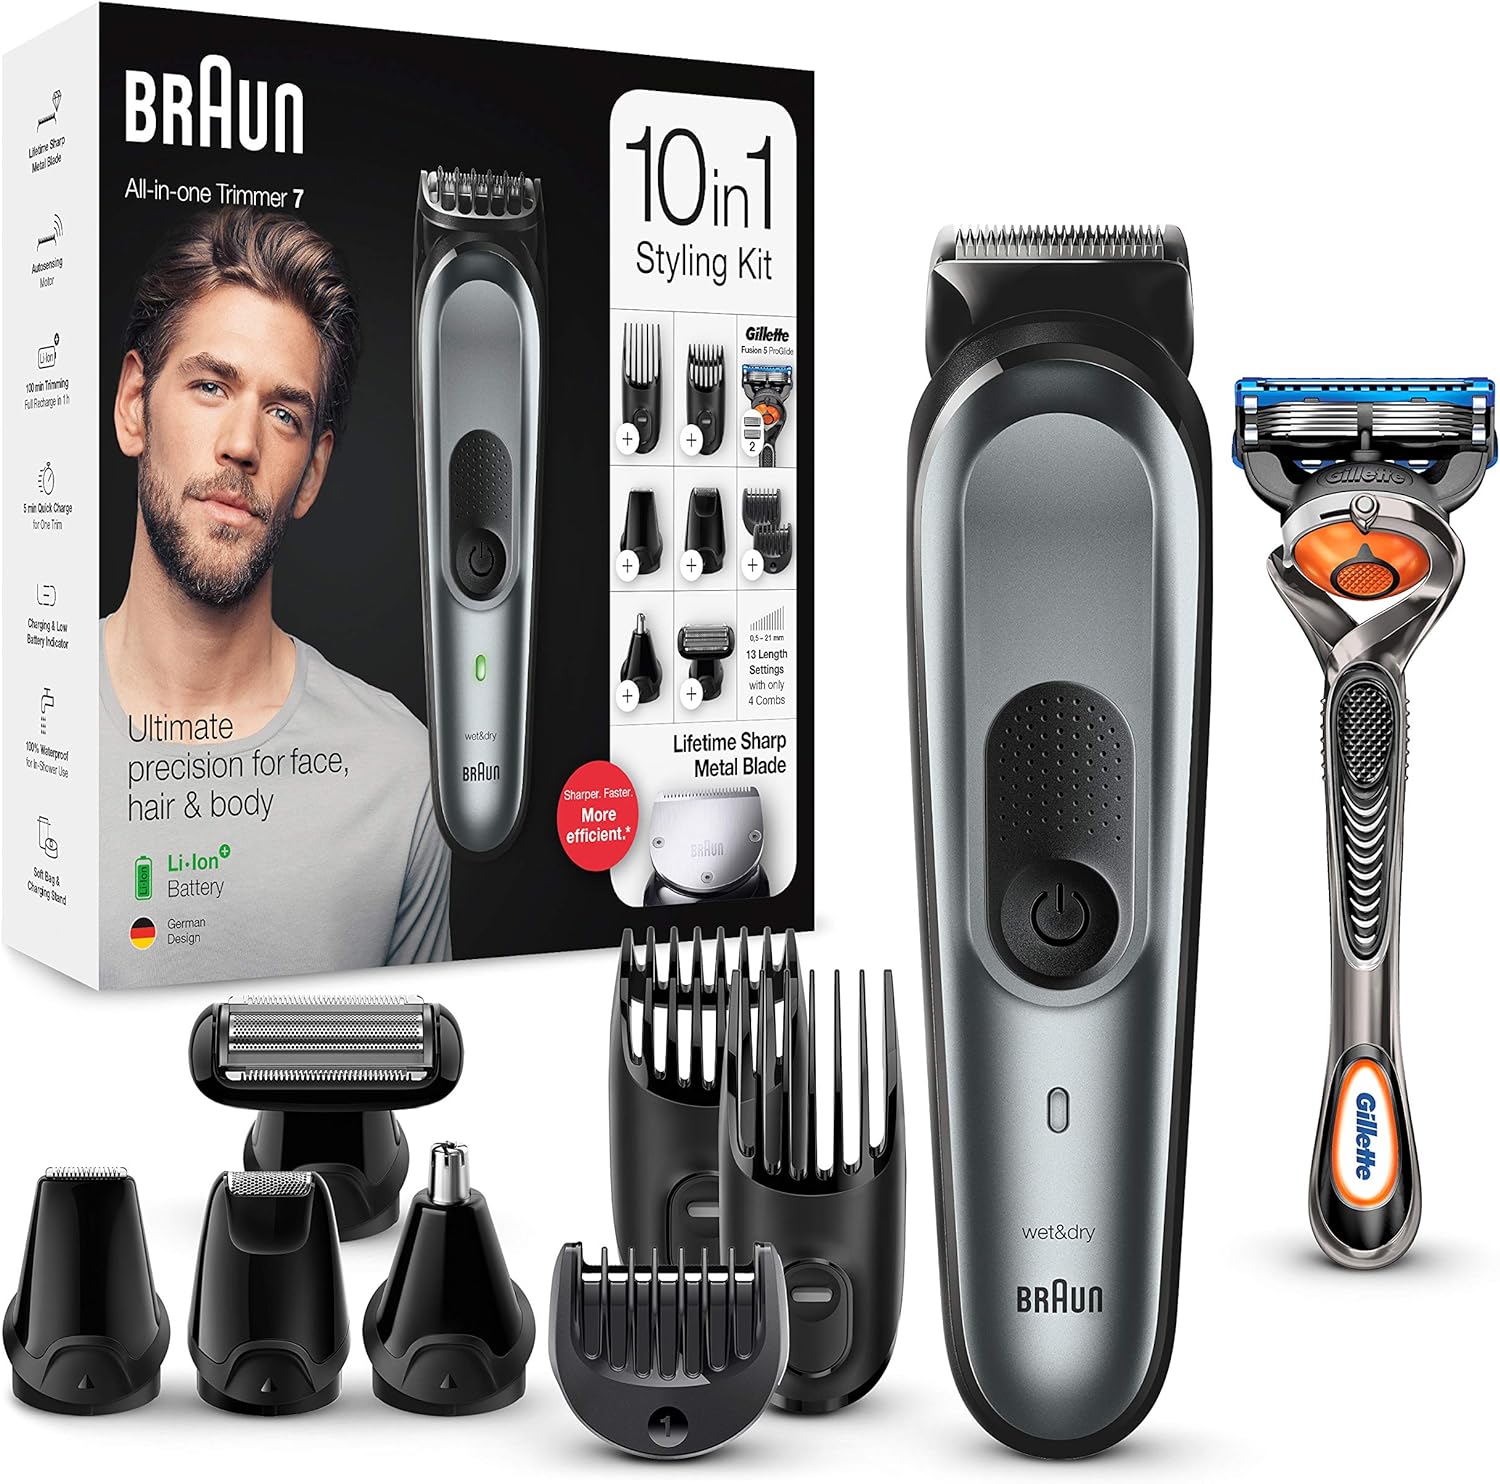 Braun 10-in-1 Beard Trimmer, With Hair & Nose Trimmer & Gillette Razor, For Face & Hair Trimming, Body Grooming & Clean Shaving, Gifts For Men, 2 Pin Bathroom Plug, MGK7221, Dark Grey Razor